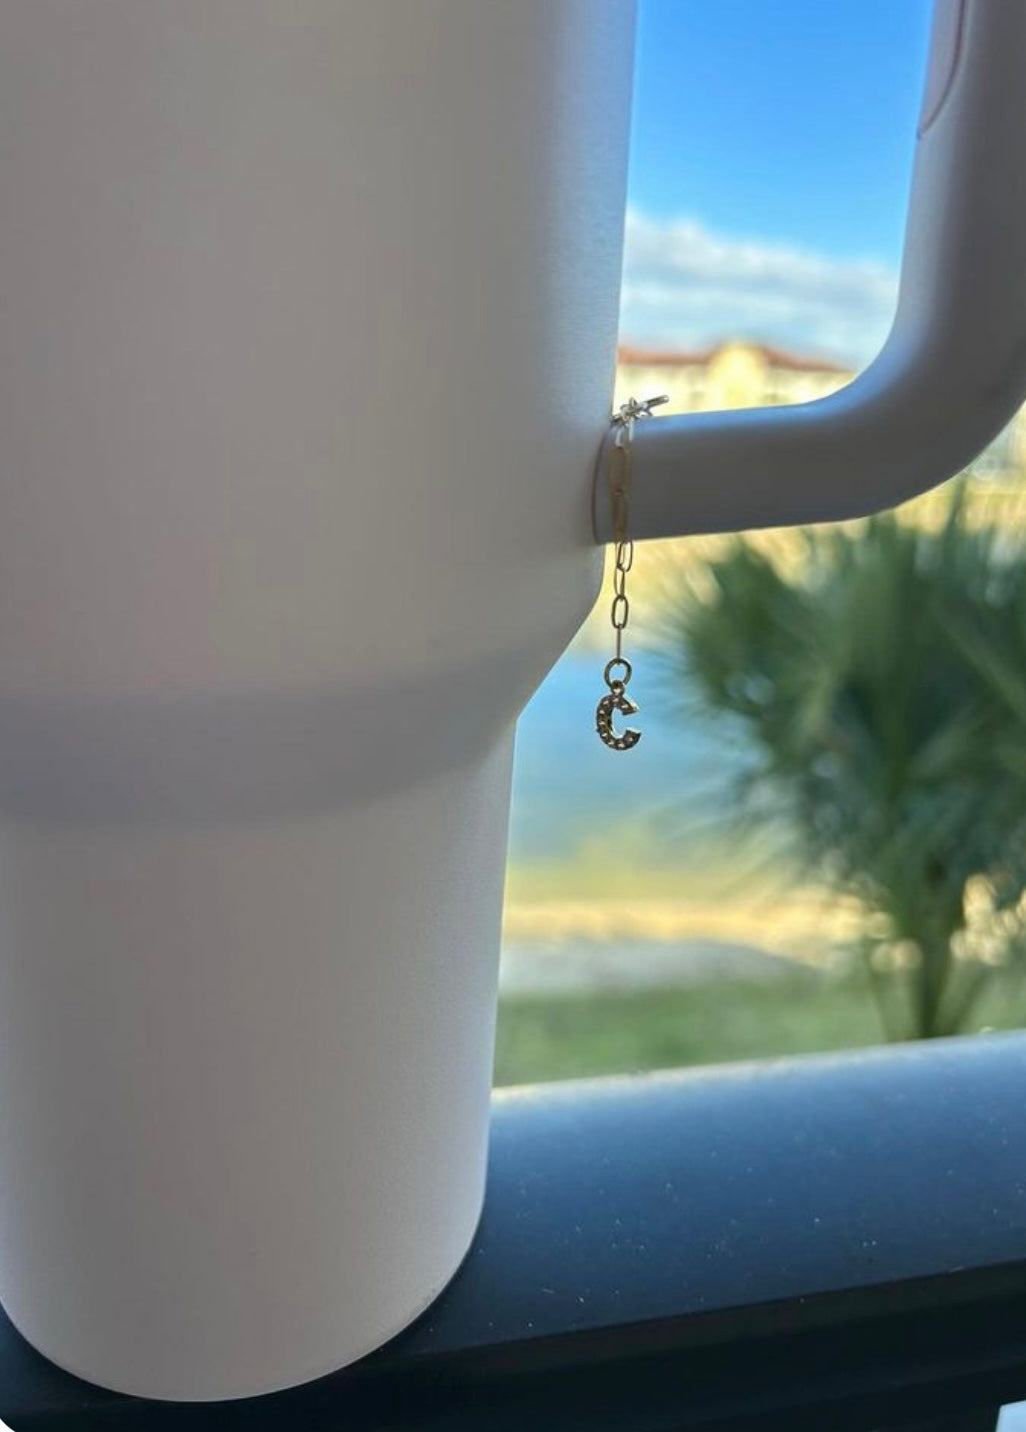 White Heart Charm, Stanley Cup Accessories - Harbor to Gulf